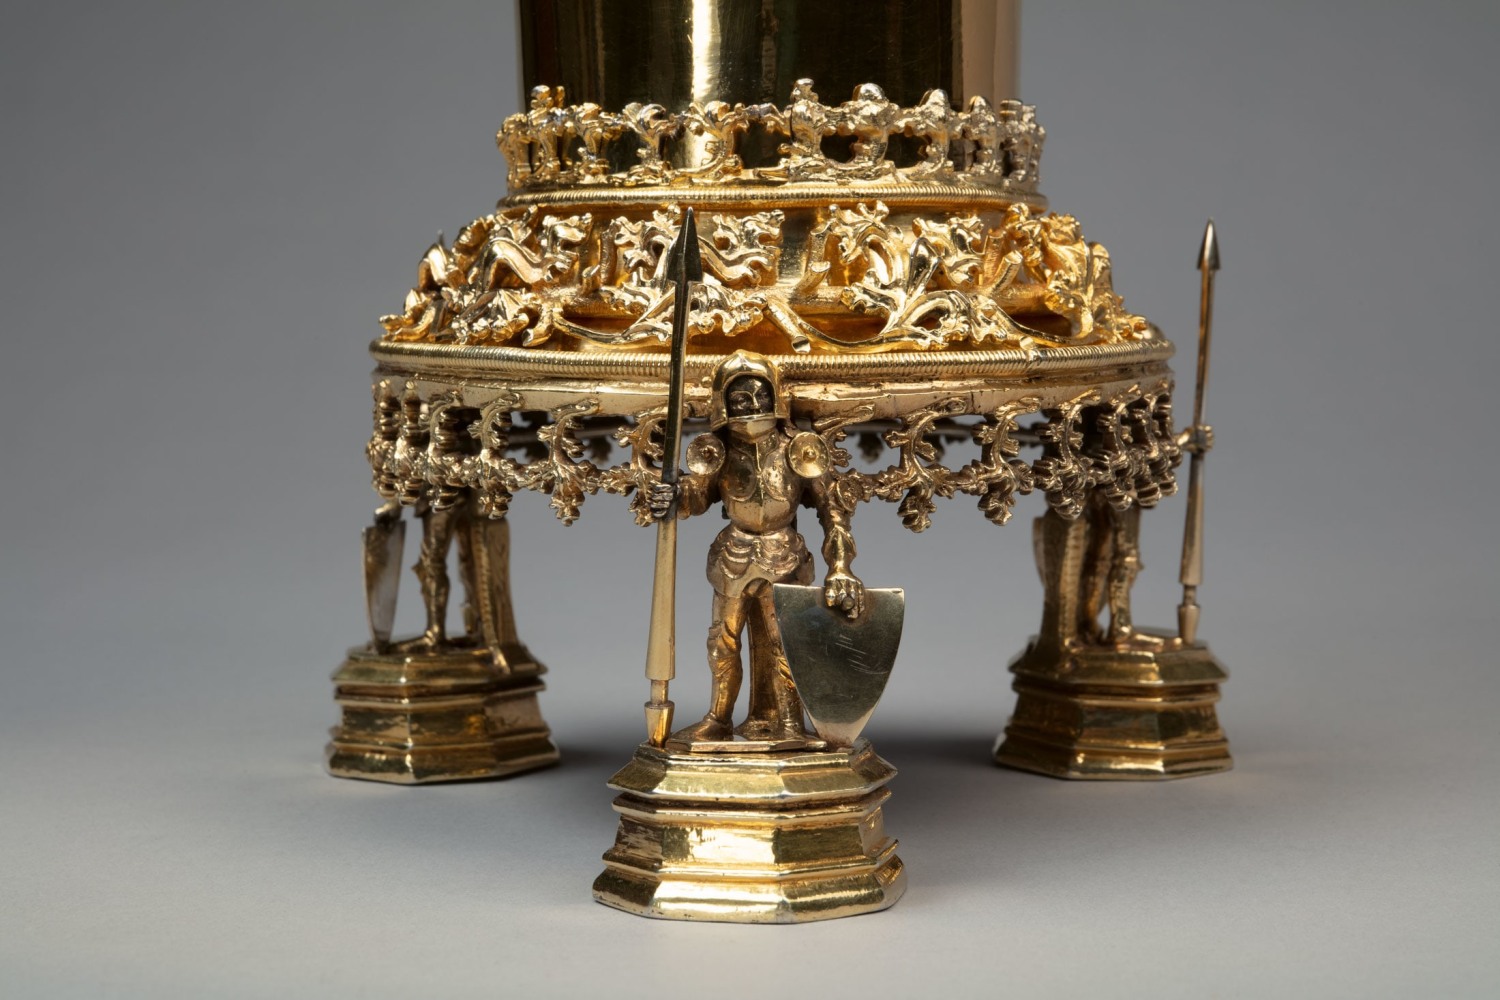 Hans Greiff (active c. 1470, d. 1516?)
A monumental lidded cup with the figure of a courtier and three soldiers, c. 1470
Germany, Bavaria, Ingolstadt
Cast, hammered, chased and gilded silver
Height: 21.7 inches (55 cm)
Diameter at widest point: 7.4 inches (18.8 cm)